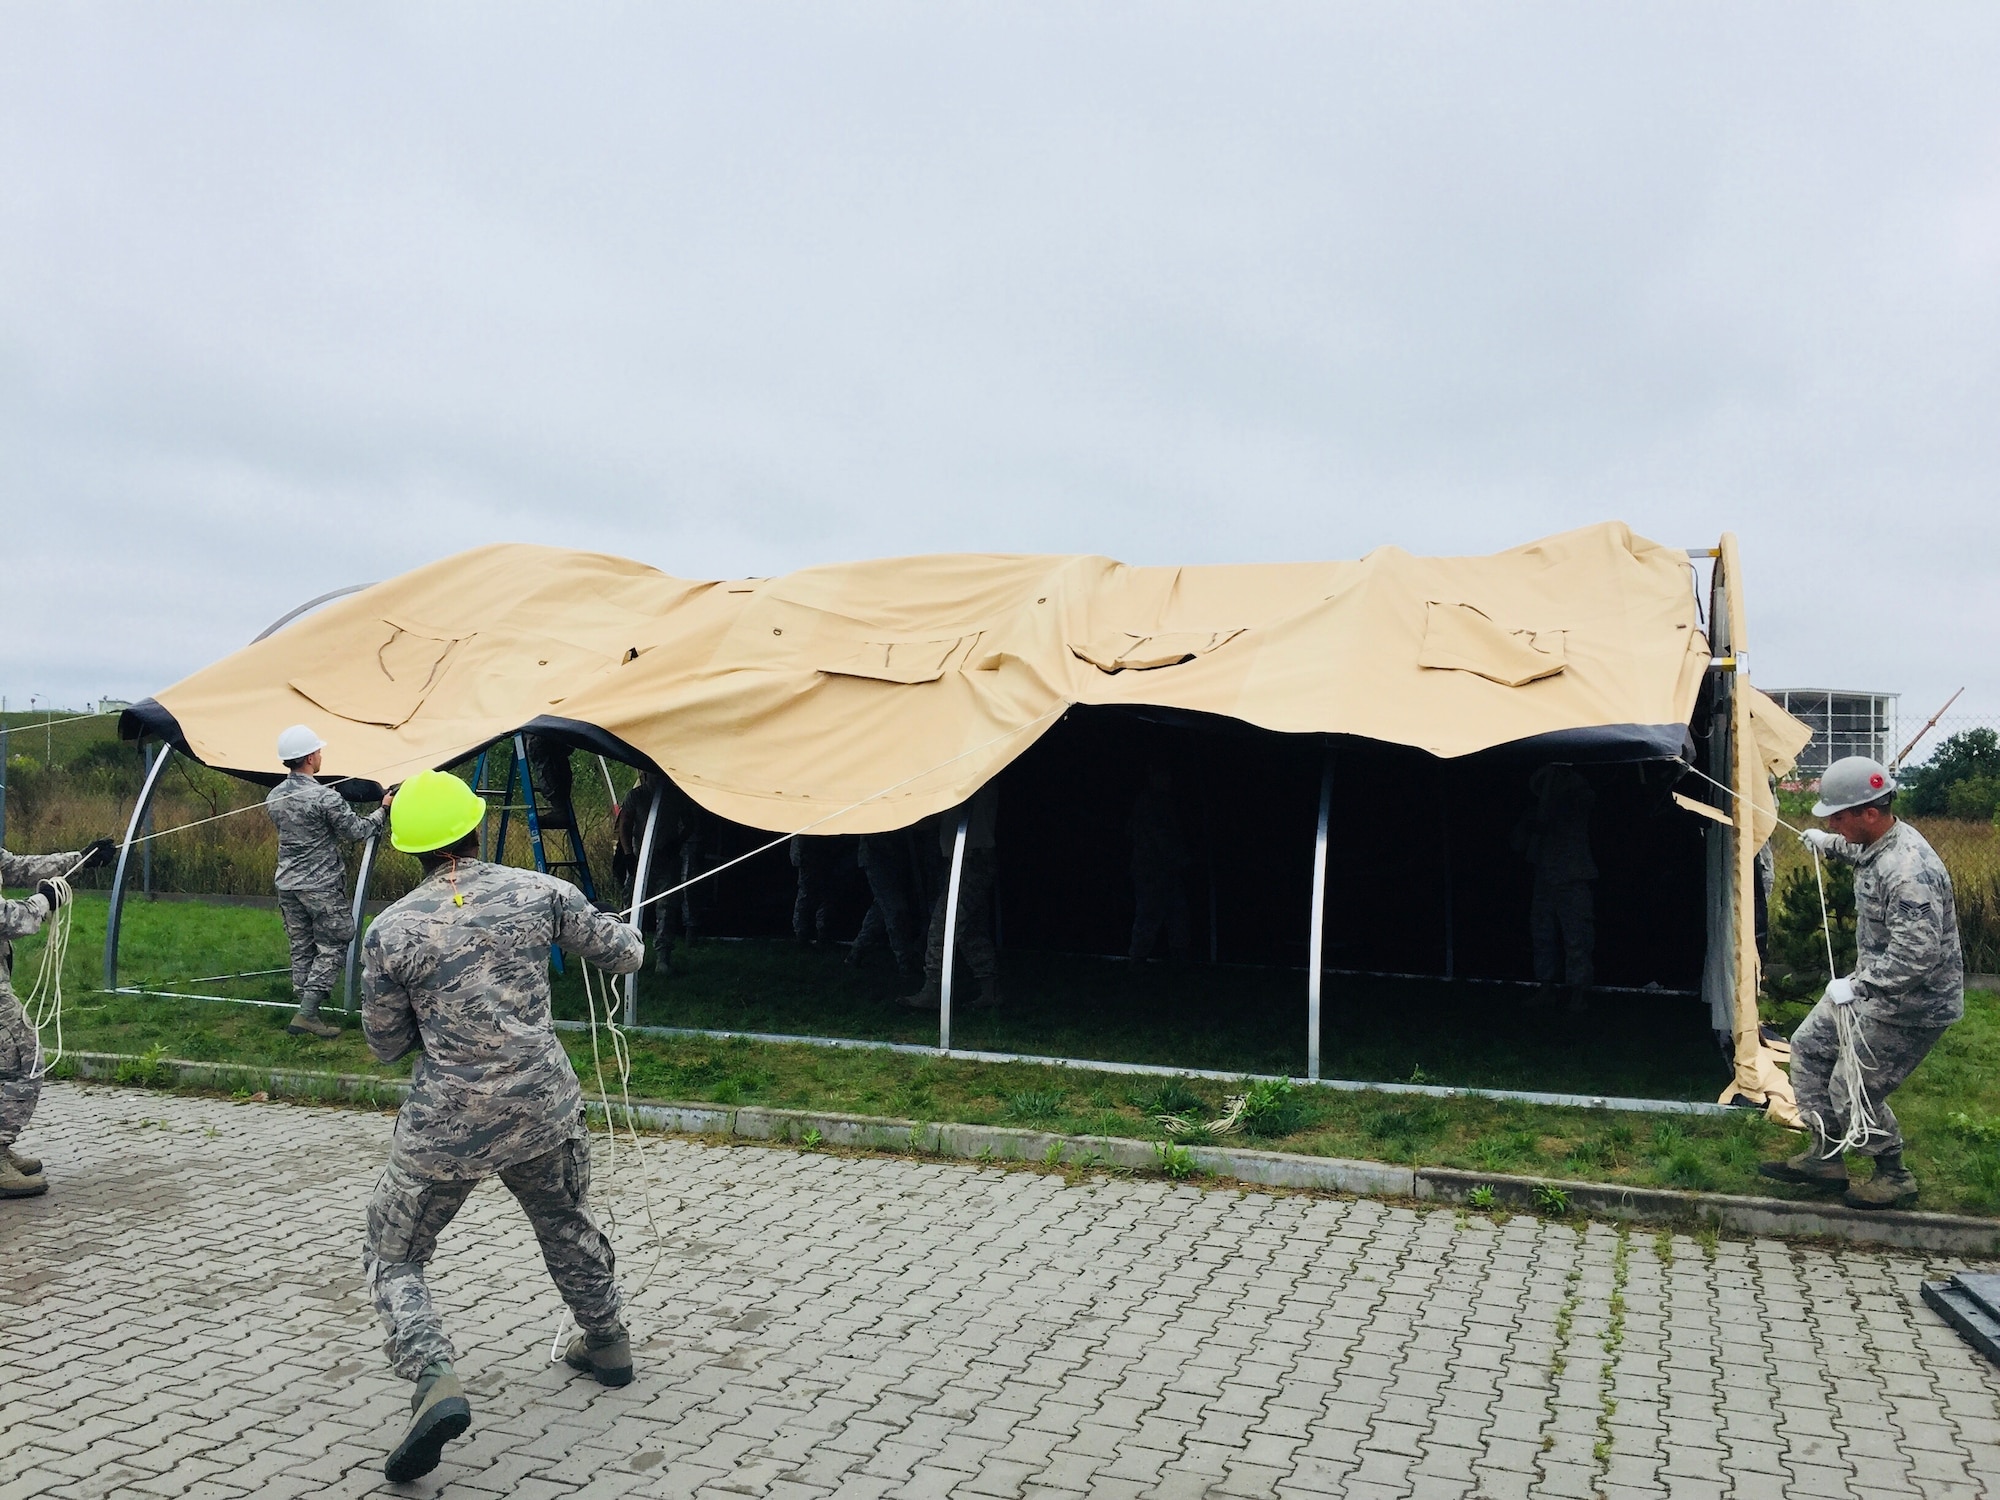 Airmen work together to setup tent city during the Deployable Air Base System (DAPS) exercise at the 31st Tactical Air Base in Poznan-Krzesiny, Poland, July 30, 2018. The DAPS exercise is a new concept for the U.S. Air Force and includes facilities, equipment, and vehicles as part of the setup to support a deployable airbase. This enables the military to respond to potential contingency needs more rapidly.